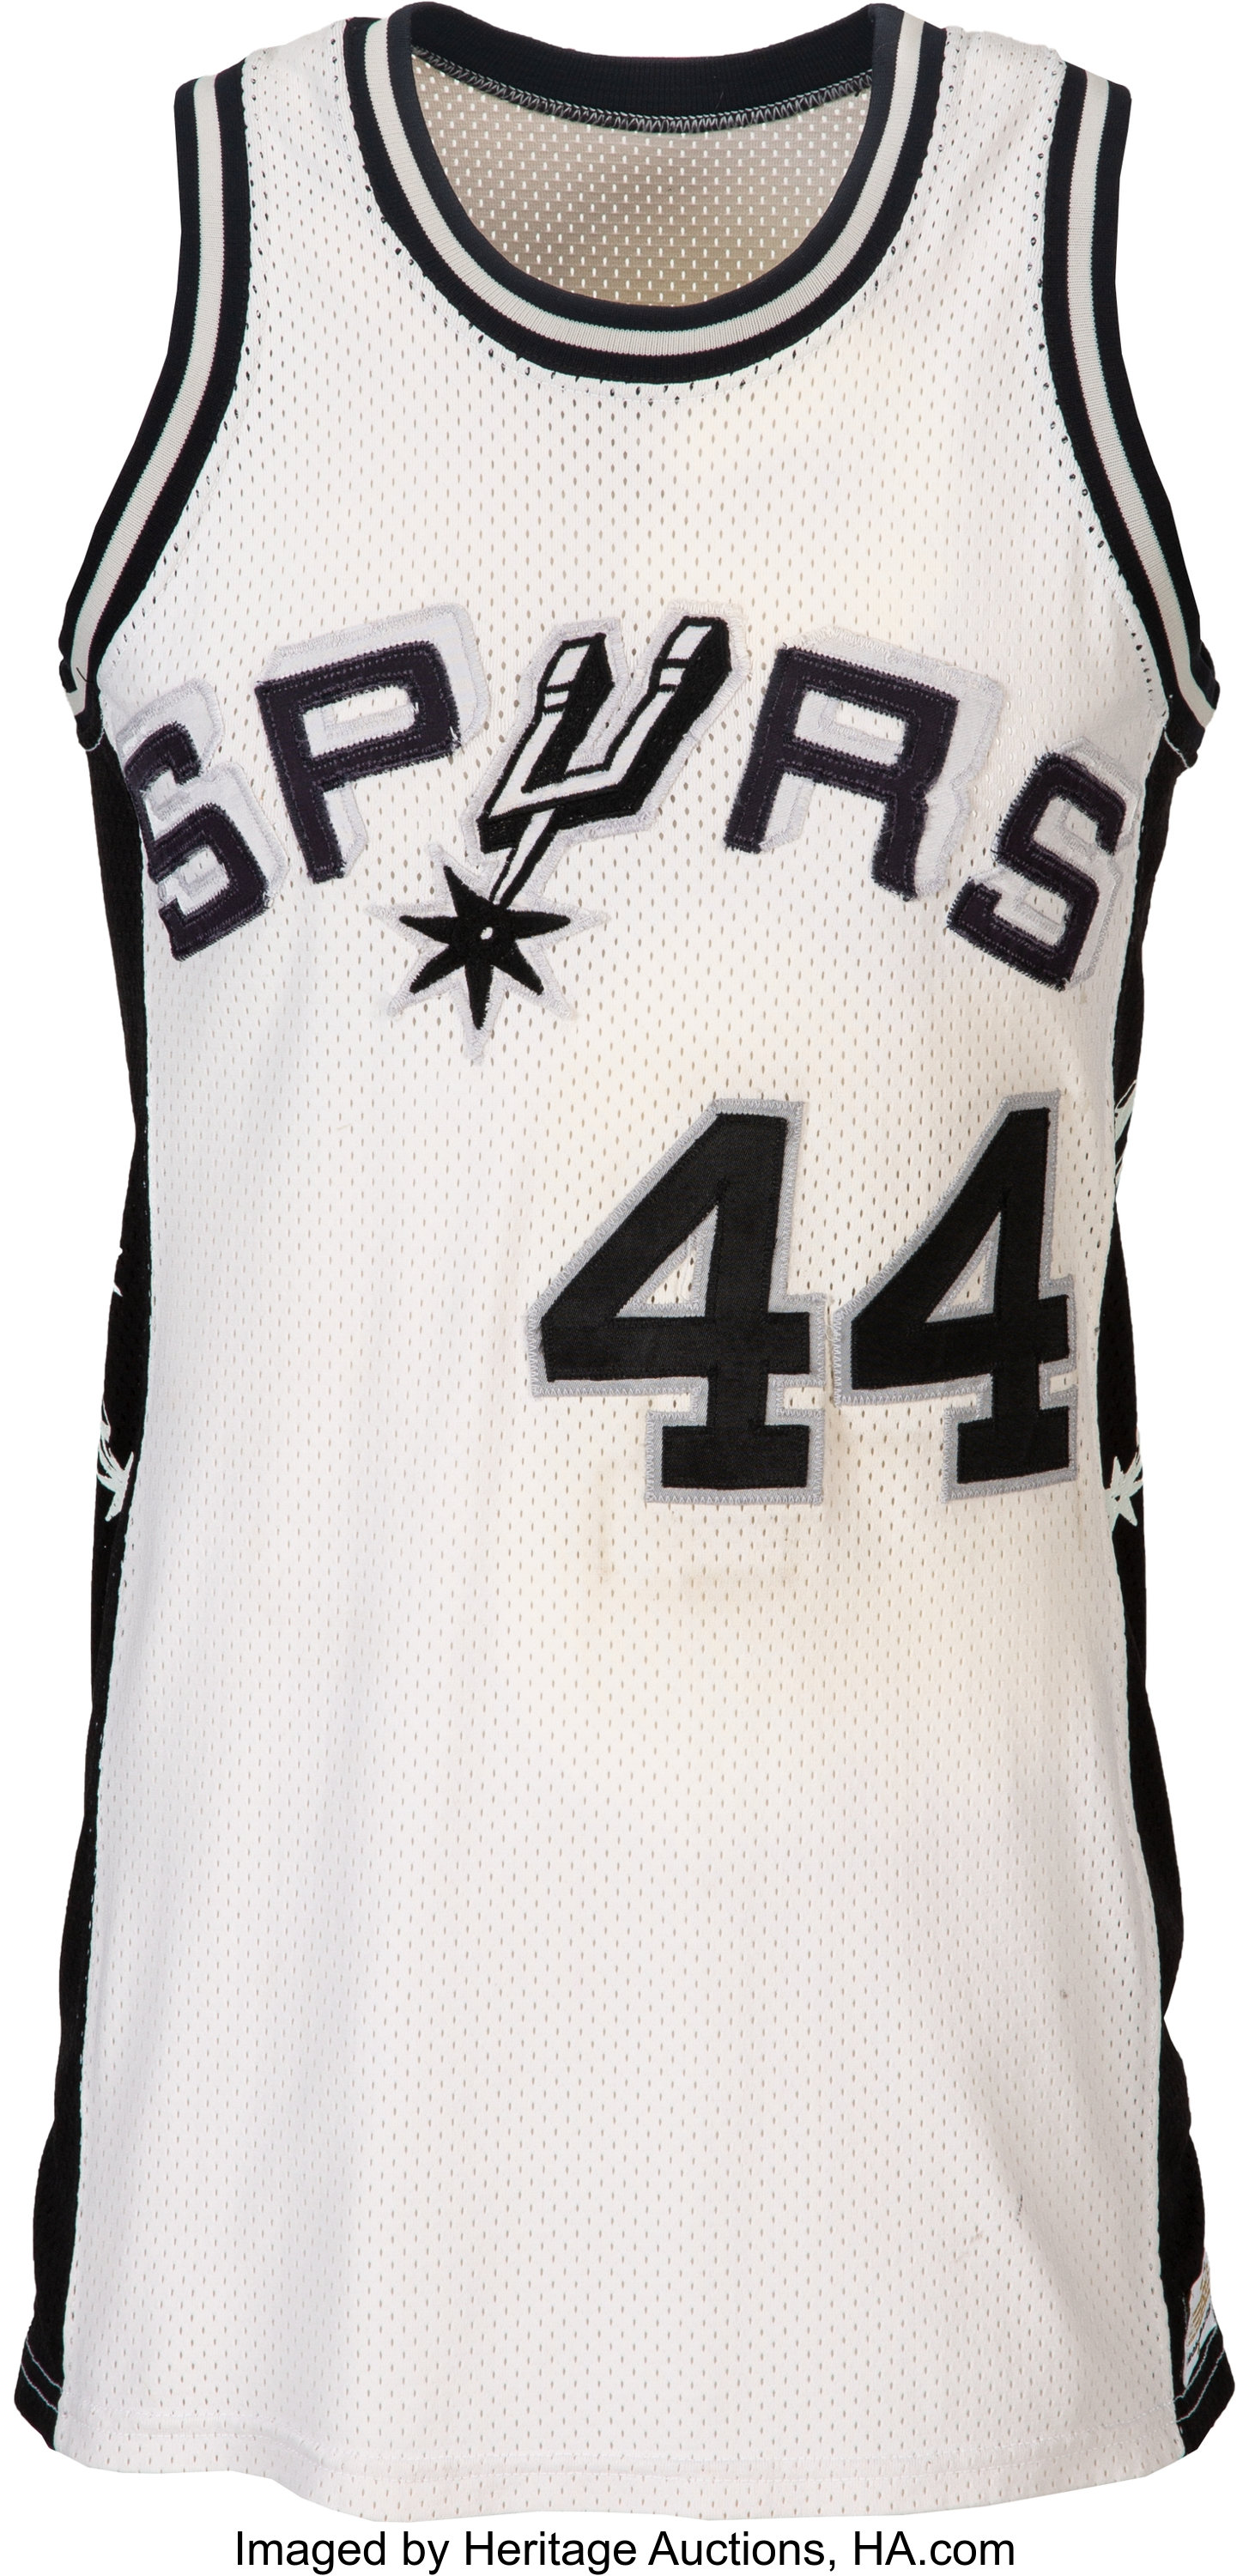 Ca 1977 George Gervin Spurs Game Used Jersey